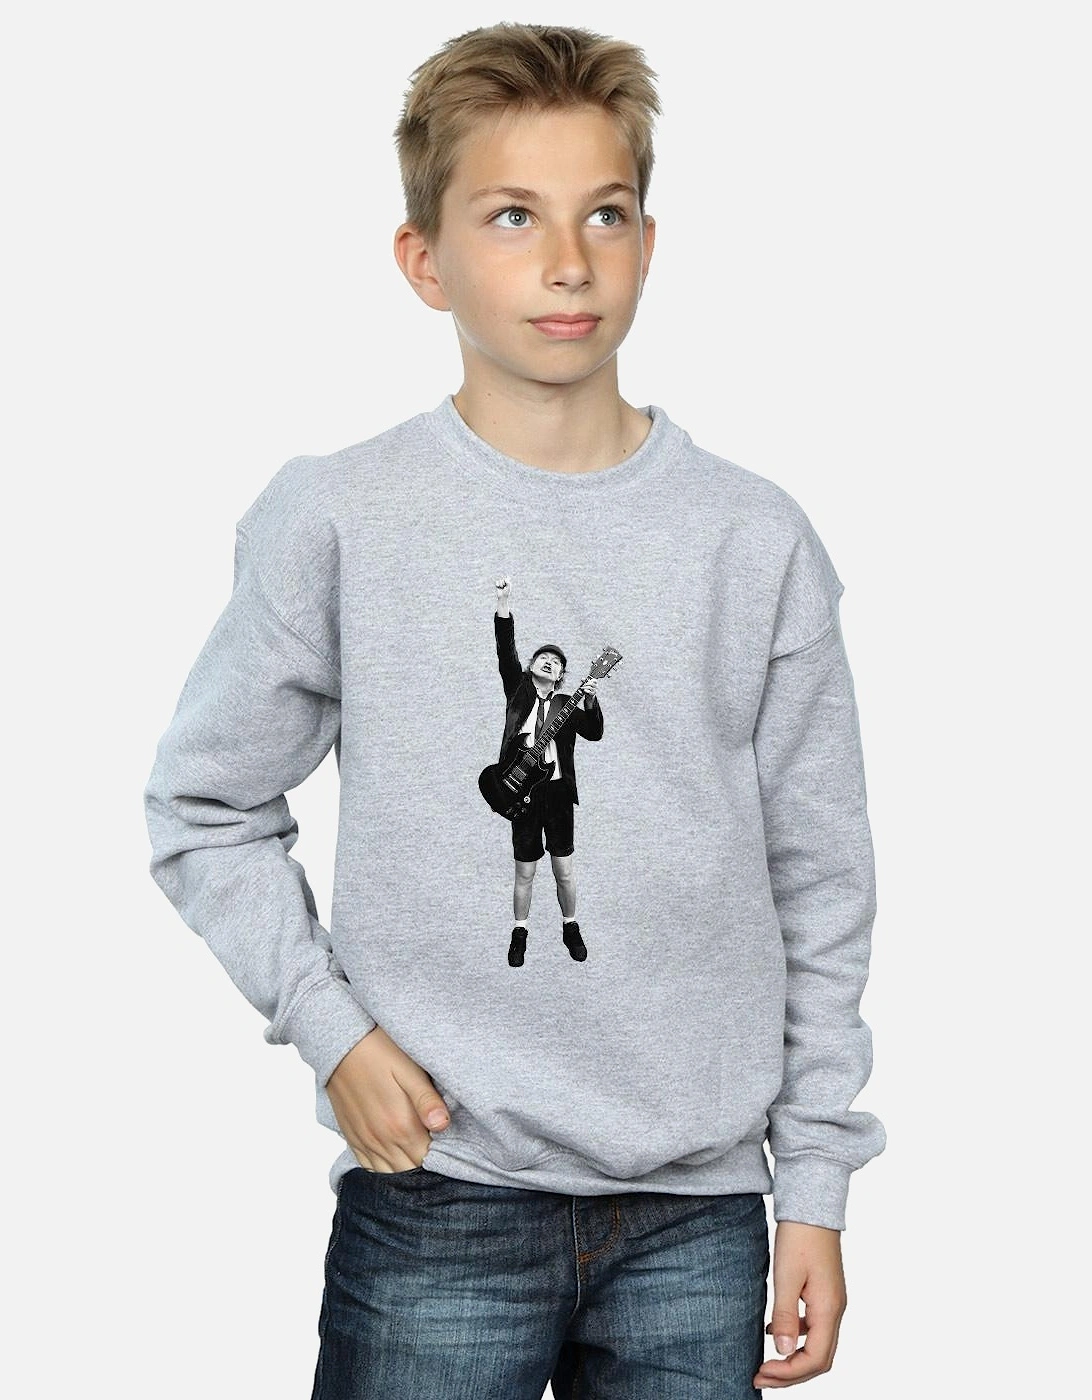 Boys Angus Young Cut Out Sweatshirt